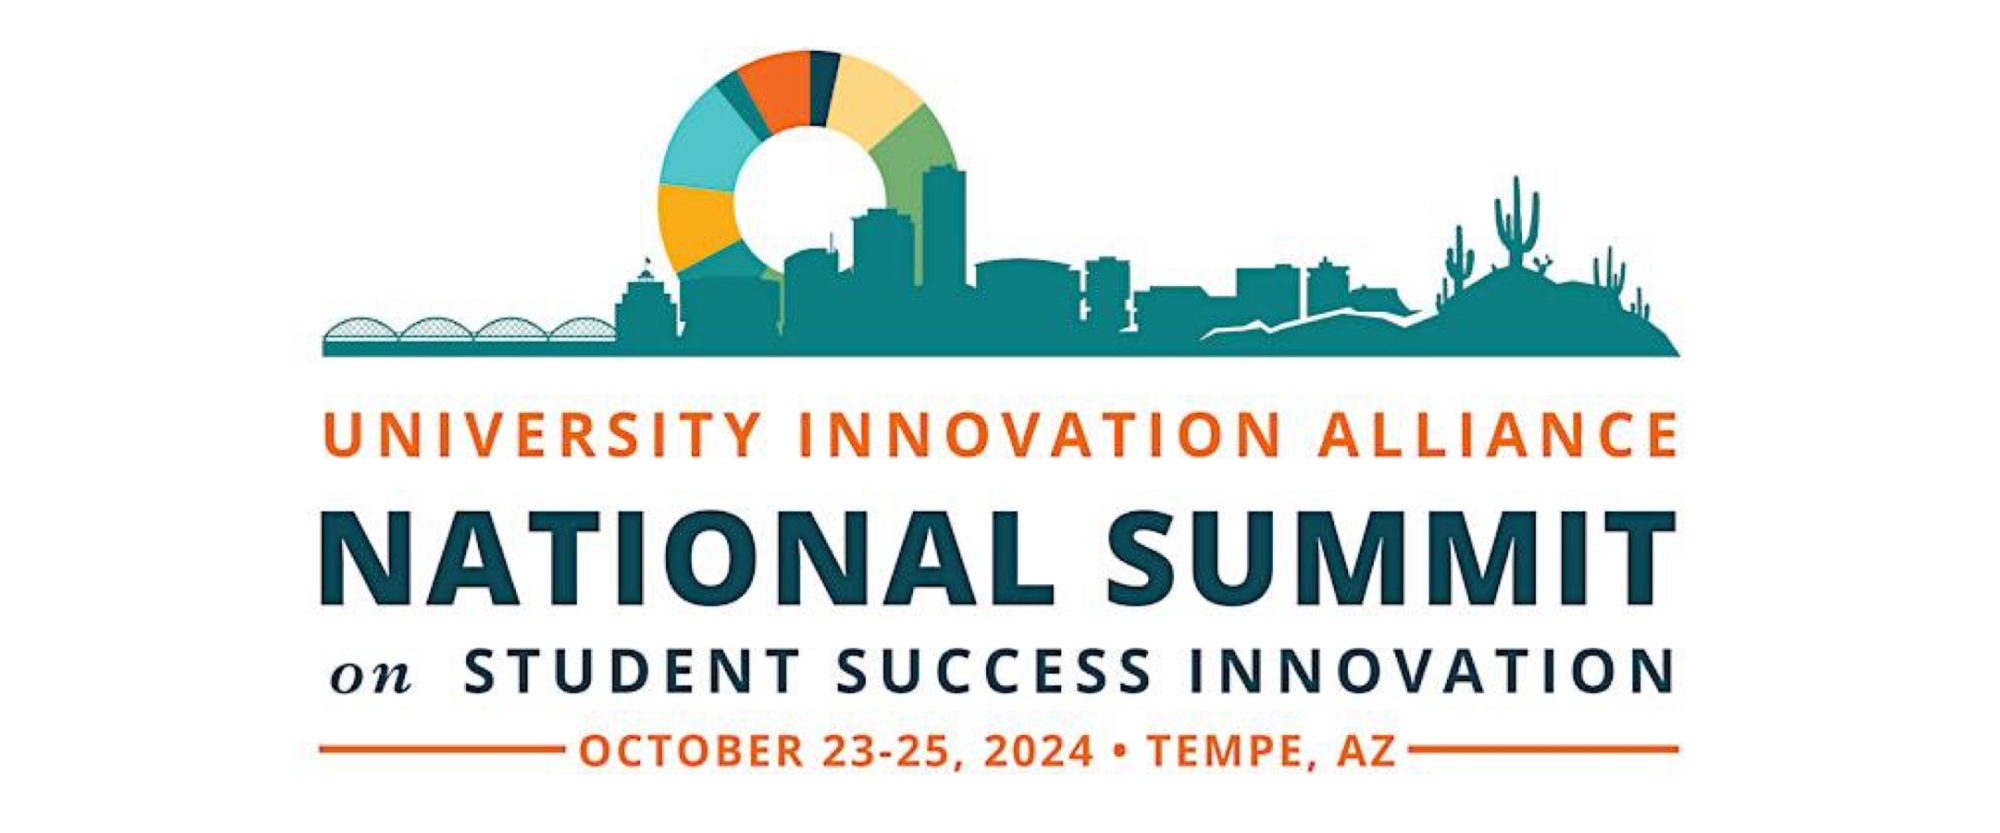 Innovate with Us at the University Innovation Alliance’s National Summit